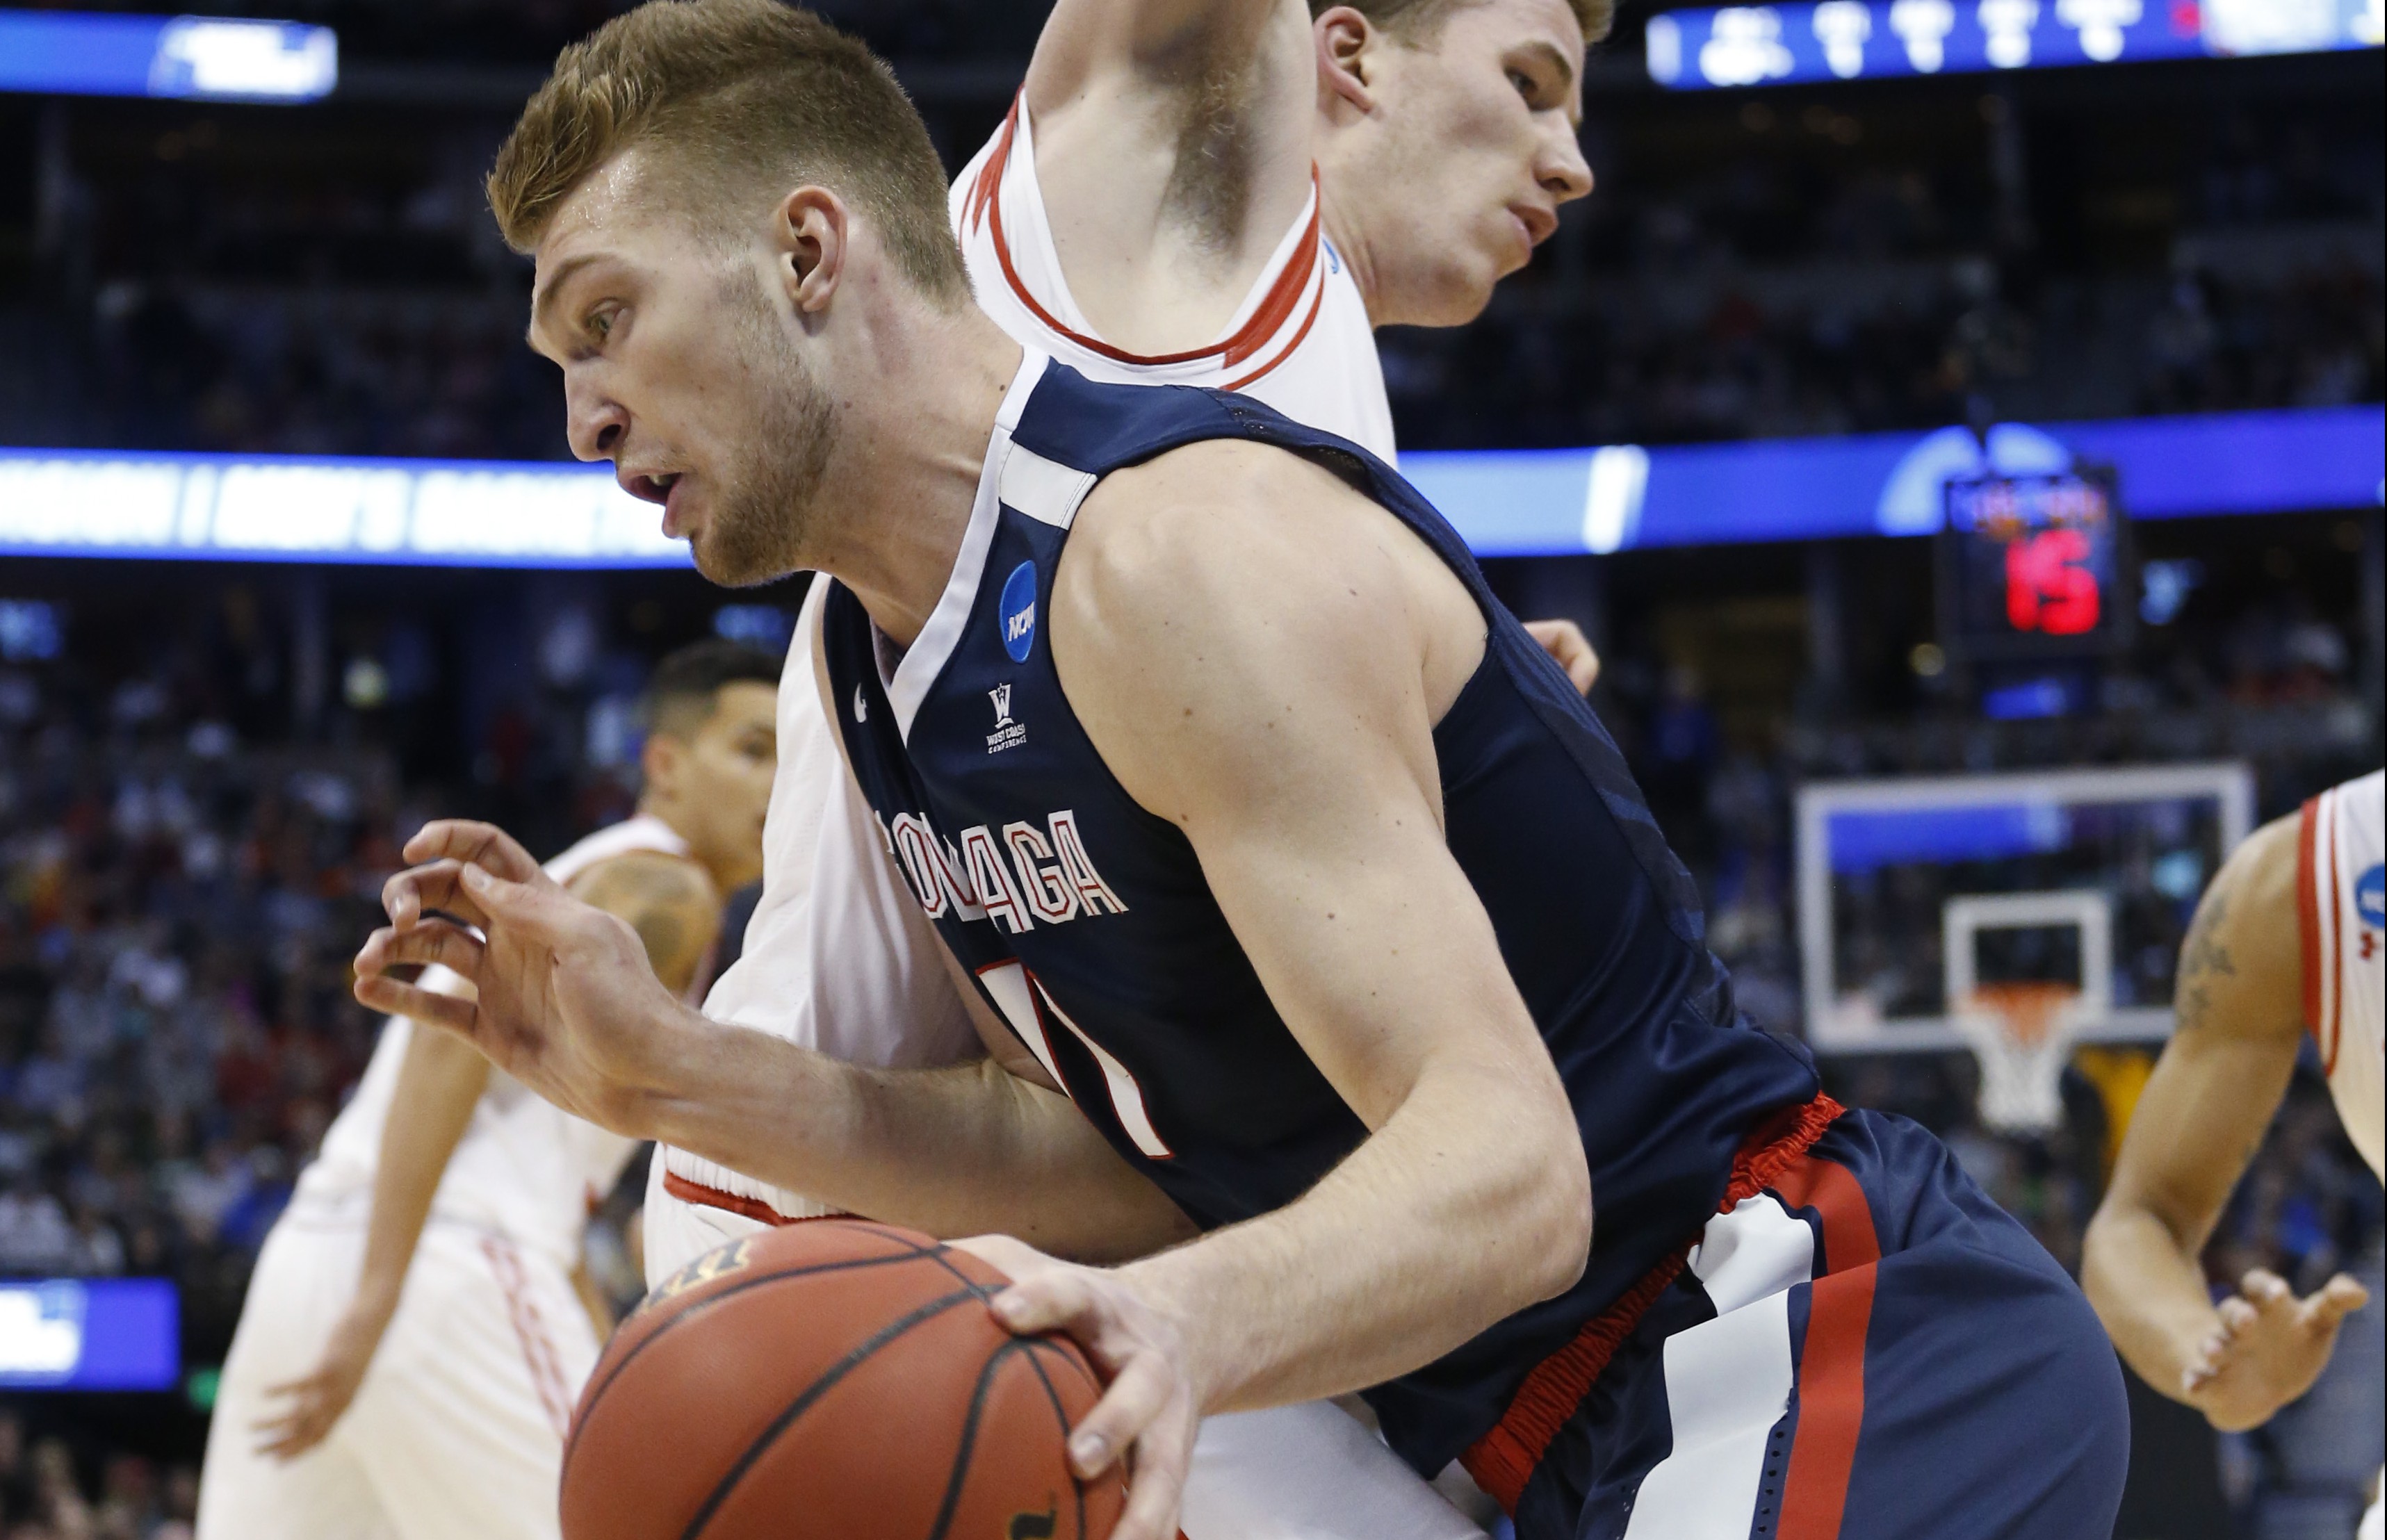 Gonzaga forward Domantas Sabonis, front, drives past Utah forward Jakob Poeltl during the first half of a second-round men's college basketball game Saturday, March 19, 2016, in the NCAA Tournament in Denver. (AP Photo/Brennan Linsley)